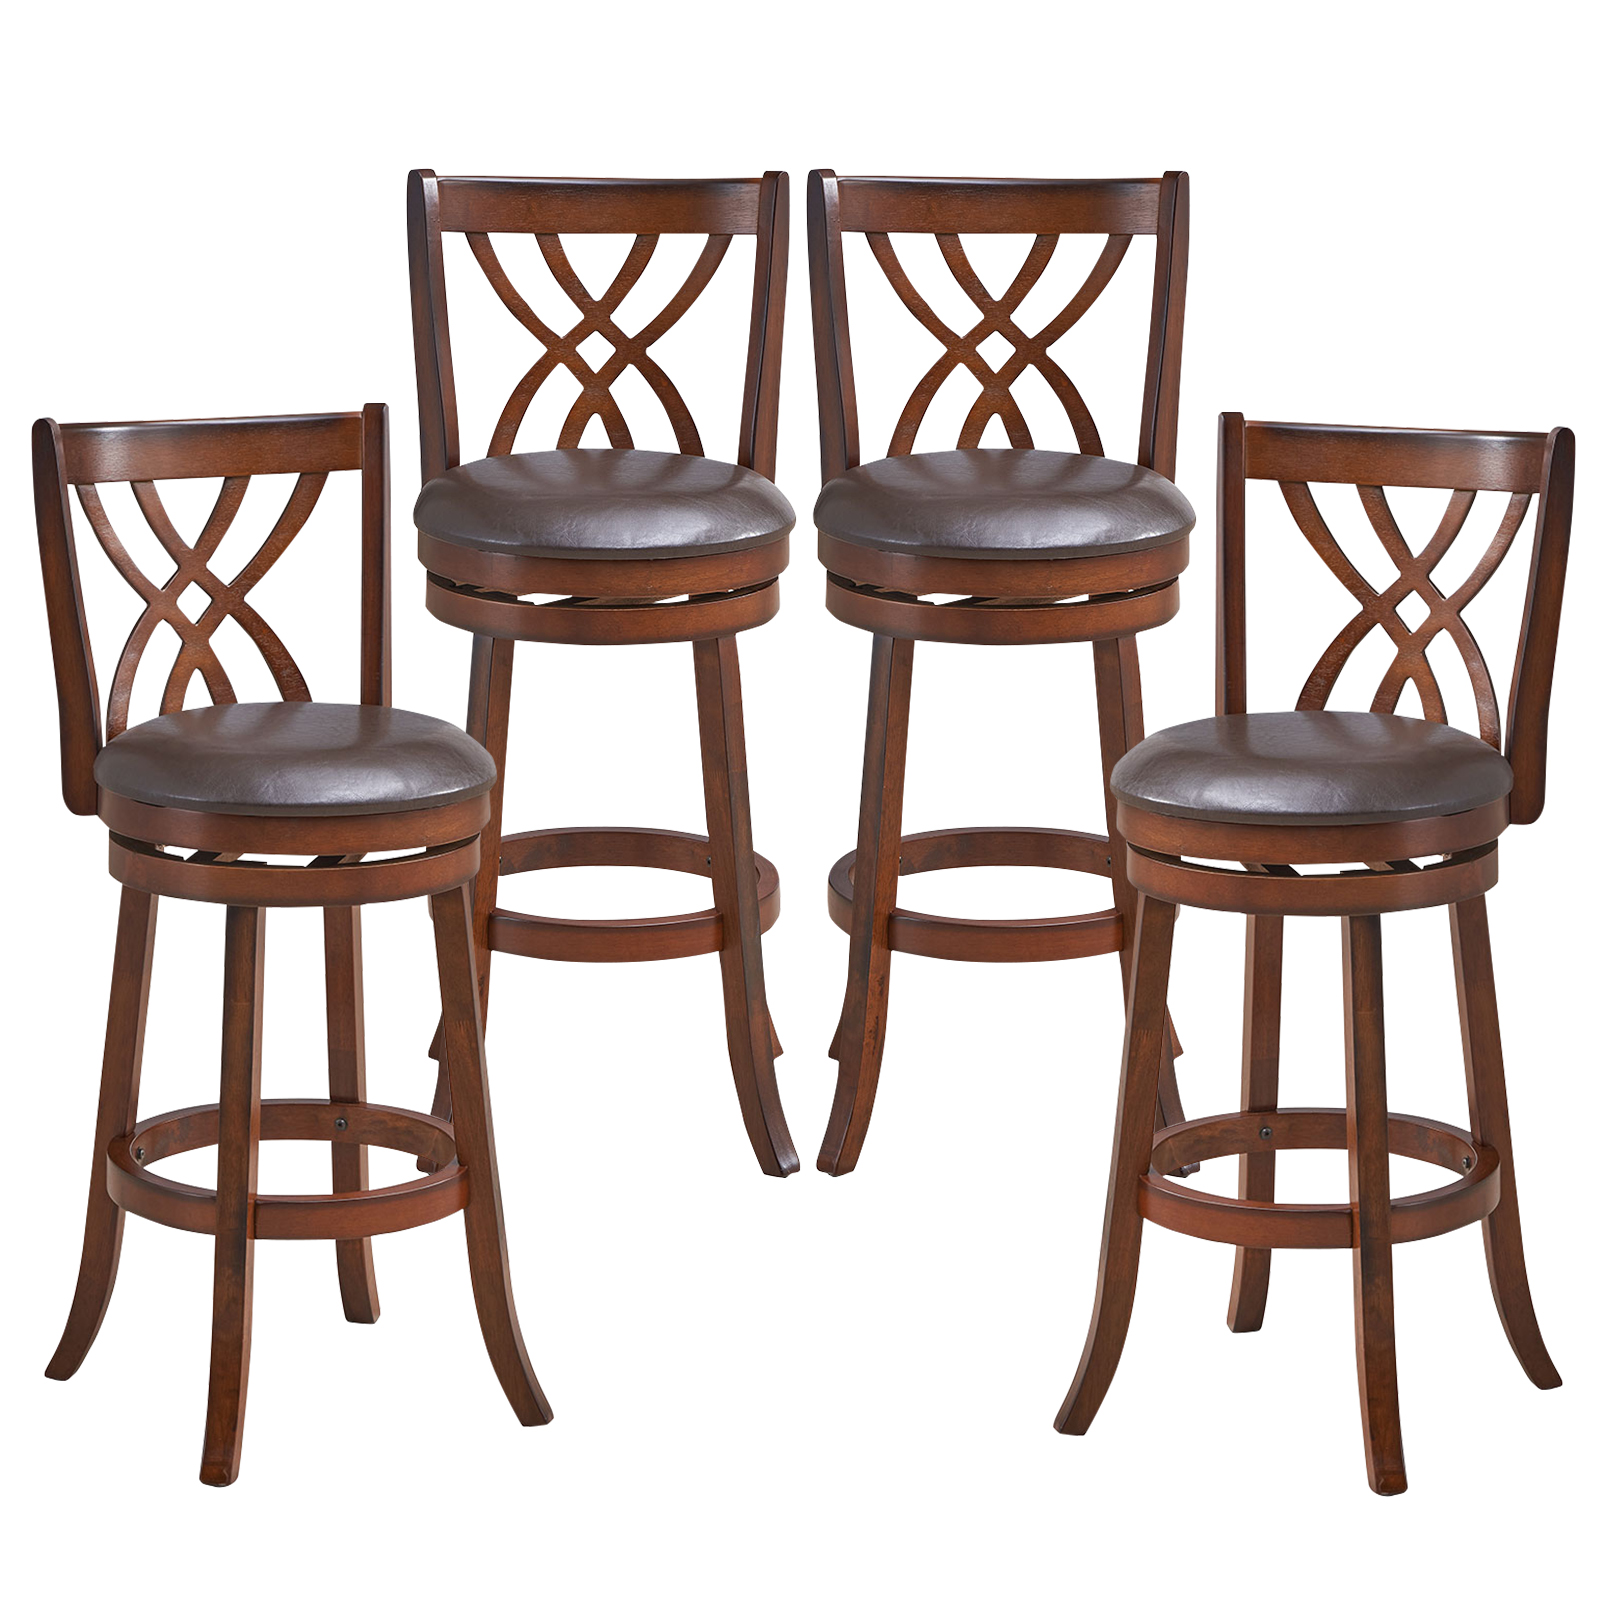 

Gymax Set Of 4 Swivel Bar Stools Bar Height Dining Pub Chairs W/ Rubber Wood Legs